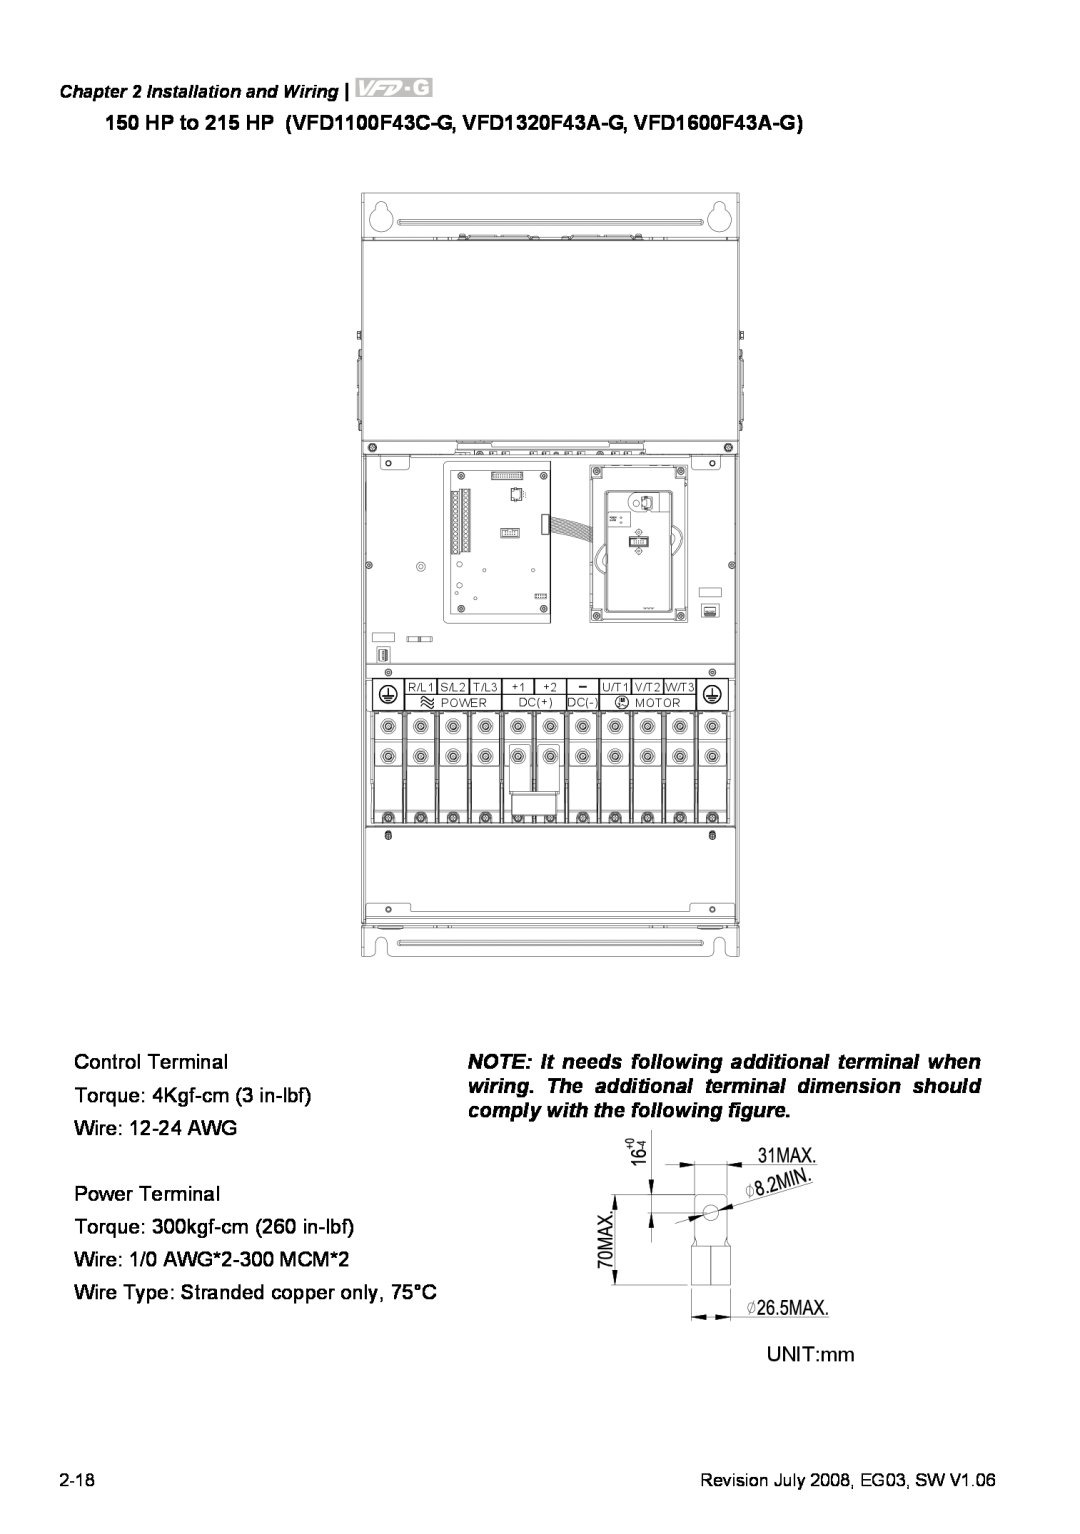 Delta Electronics VFD-G manual Installation and Wiring, 2-18, Revision July 2008, EG03, SW, R/L1 S/L2 T/L3, Power, Motor 